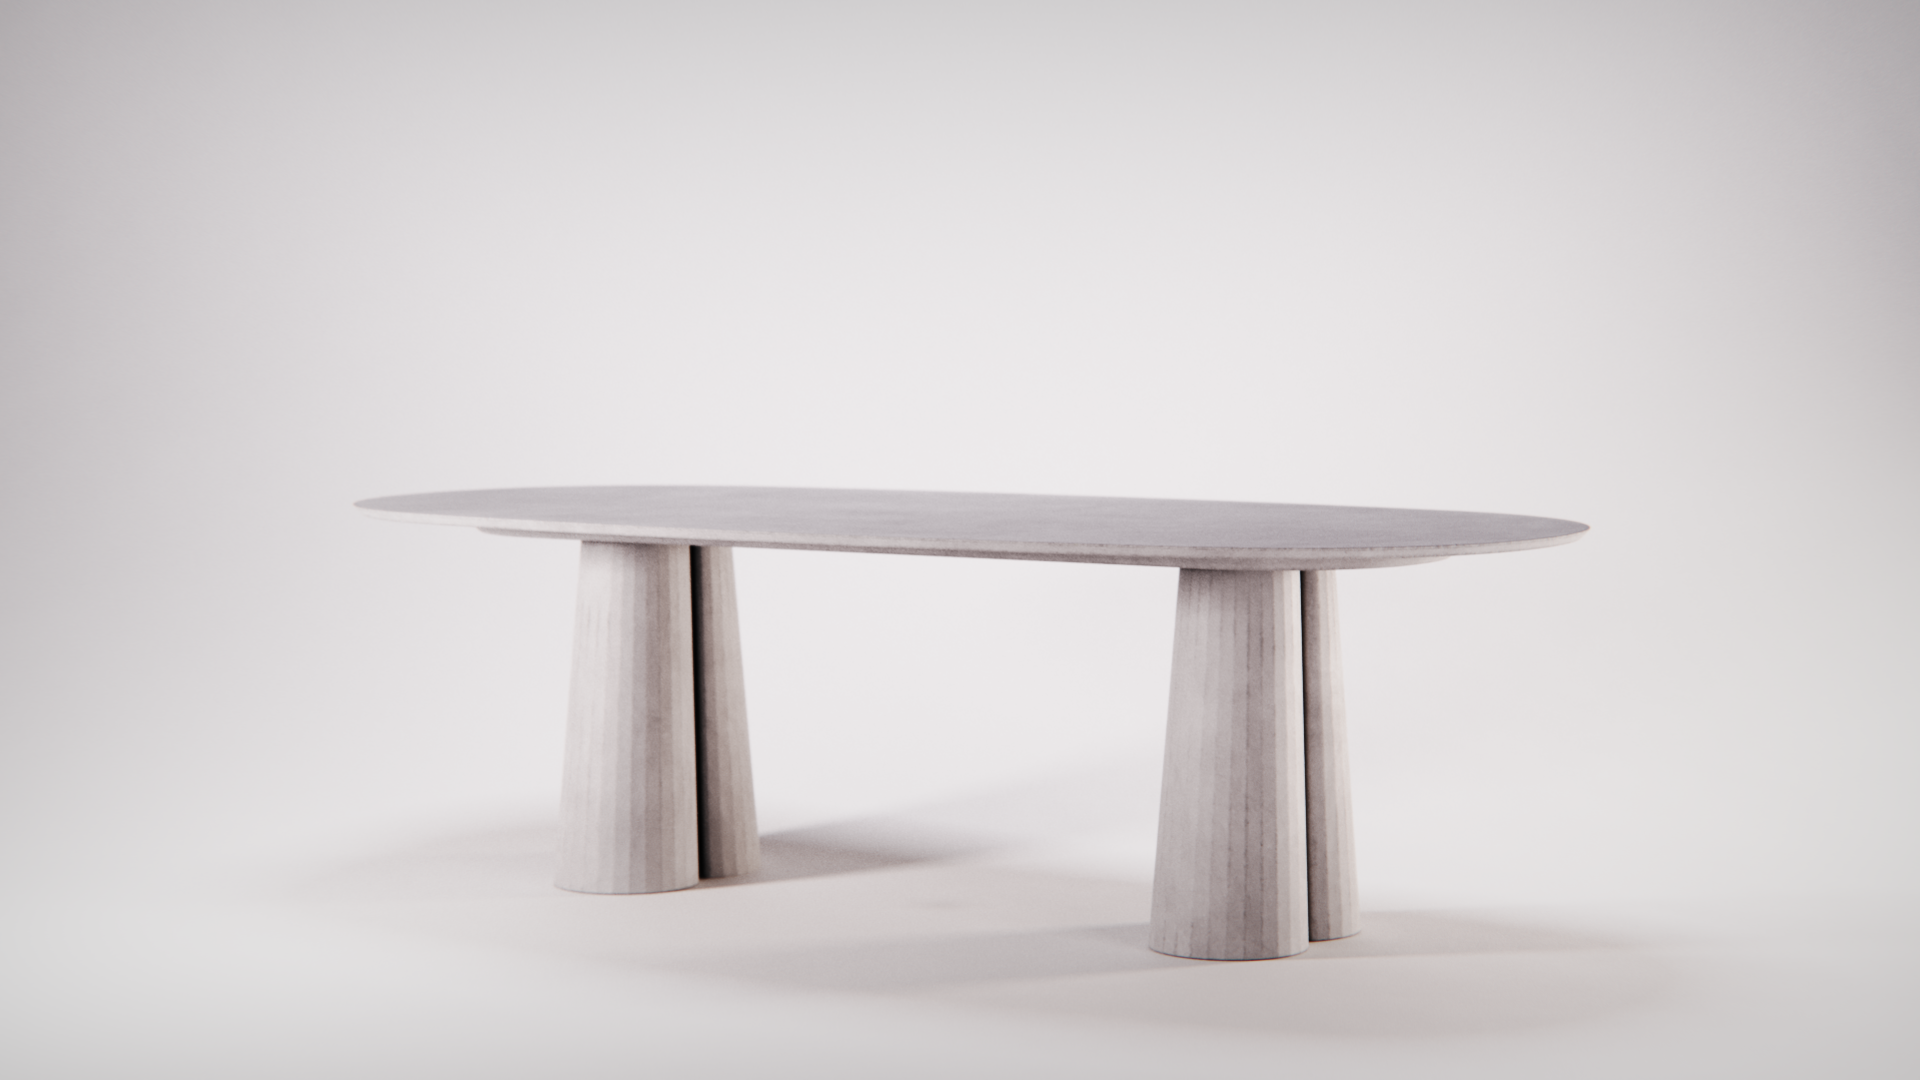 Fusto Oval Dining Table designed by Marialaura Rossiello Studio Irvine 240x120x73 Silver.png